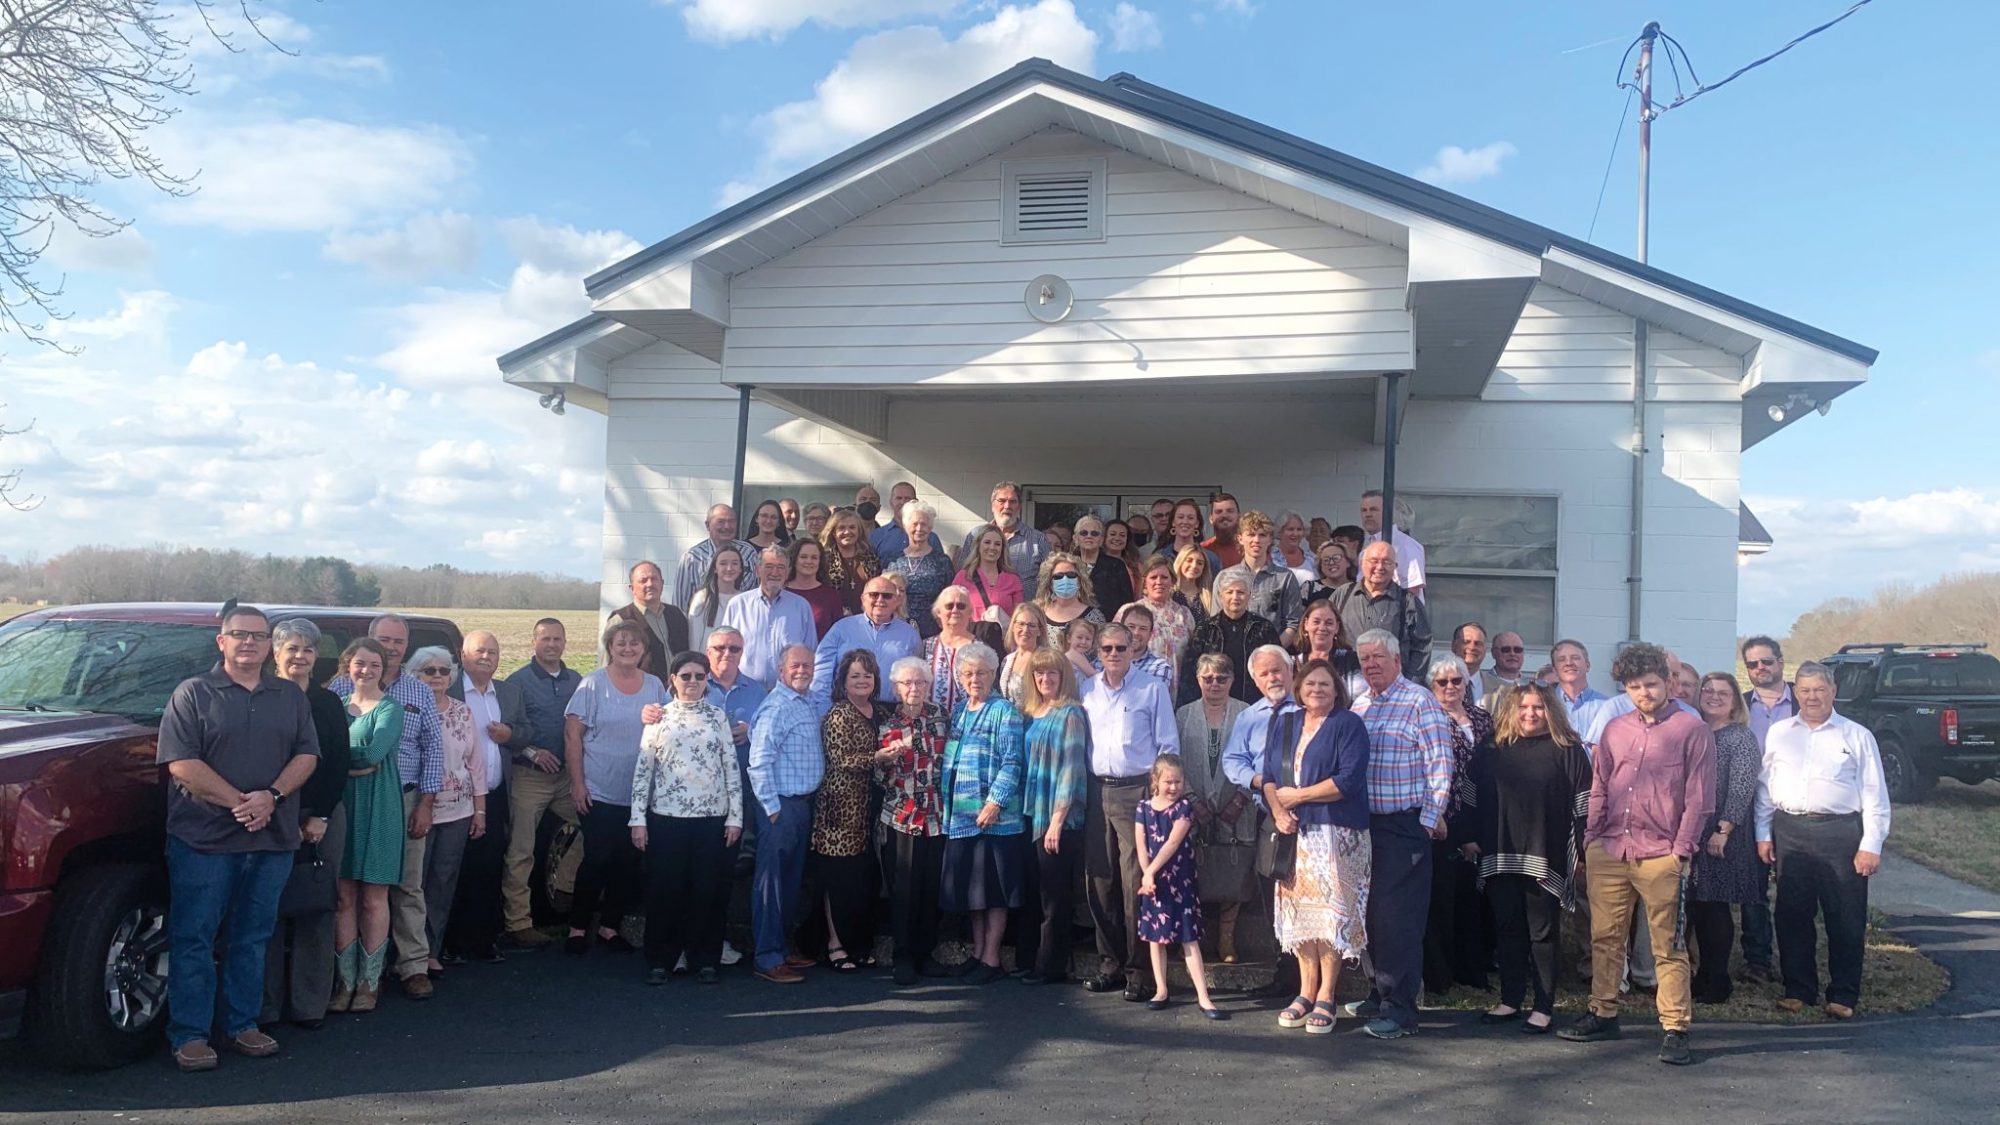 Photo of about 50 people dressed for a church service in front a small church surrounded by open fields.